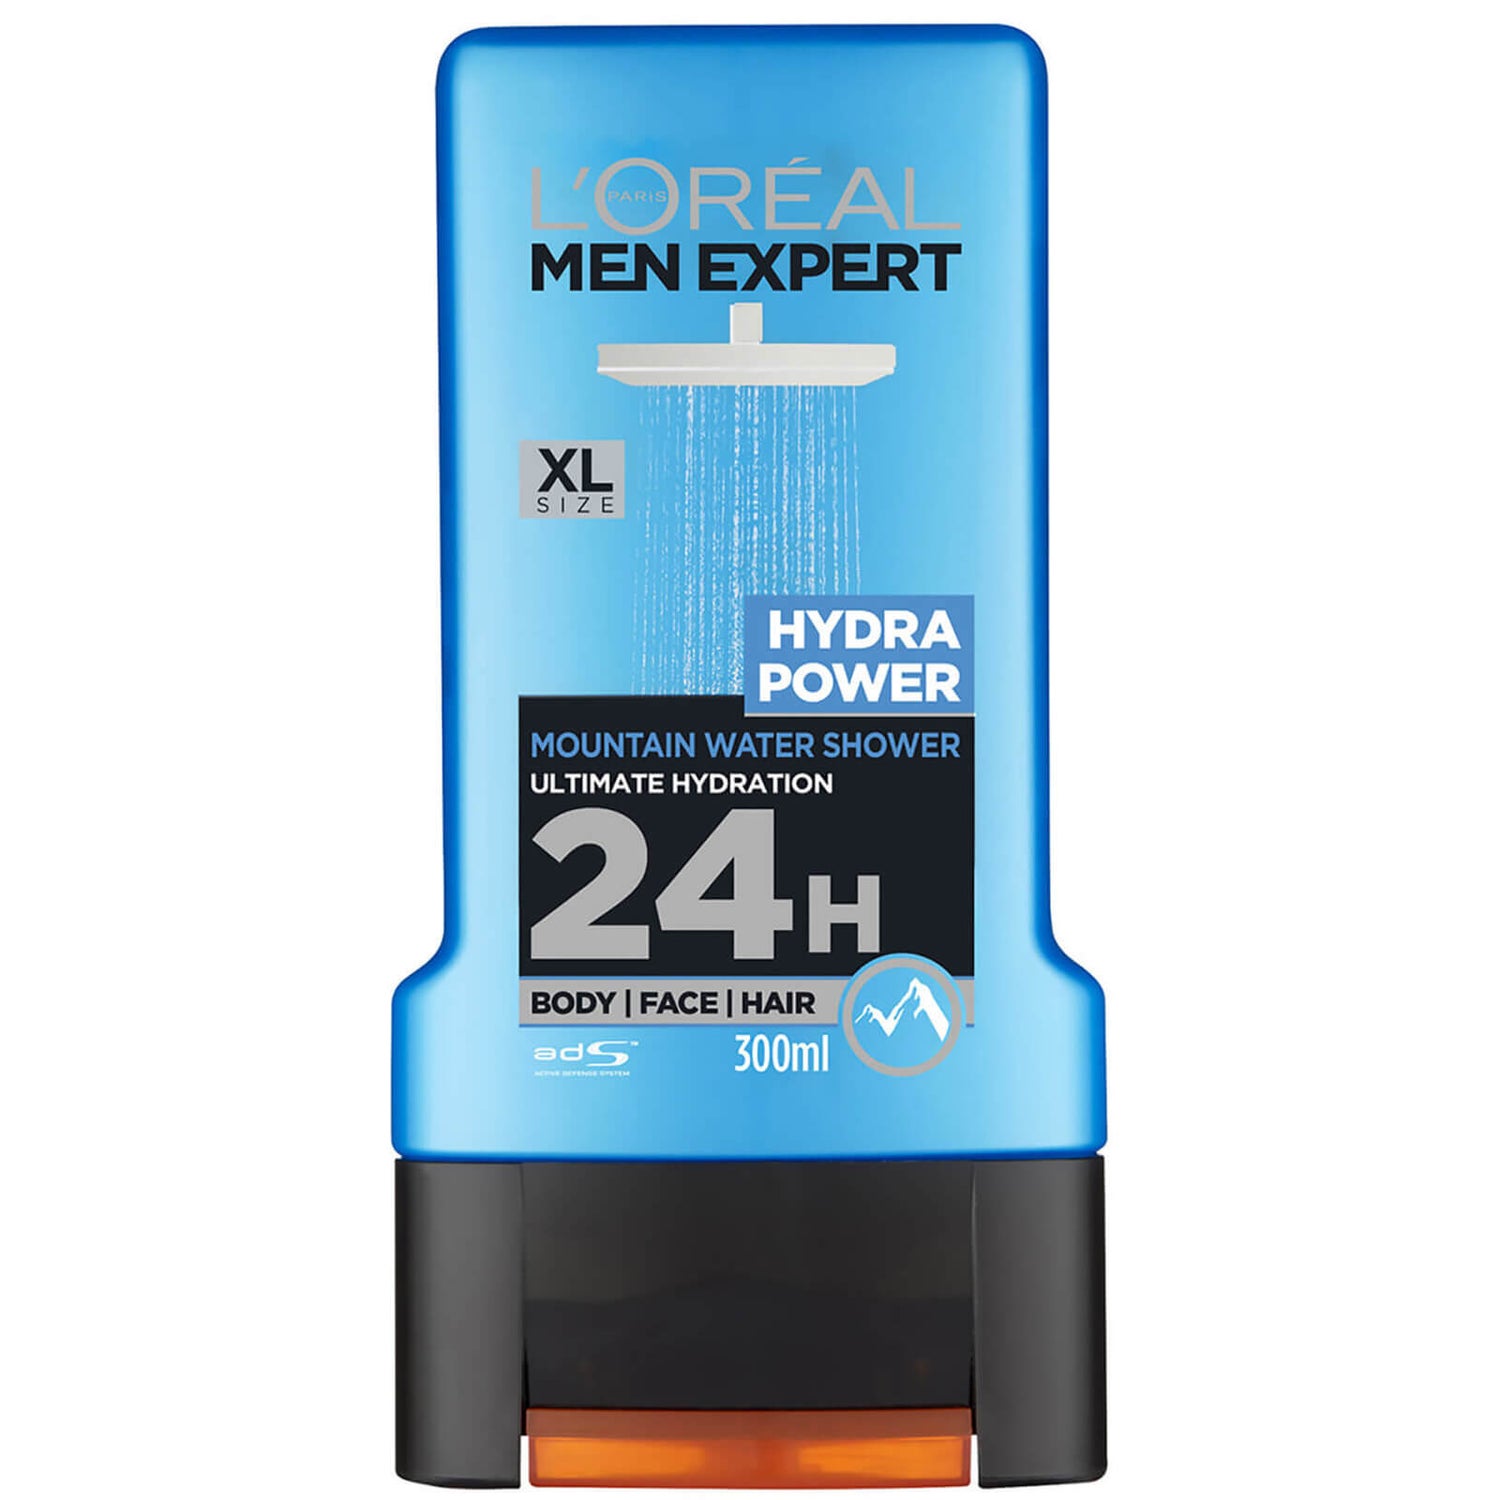 L oreal men expert hydra power tor is not working in this browser is hydra2web